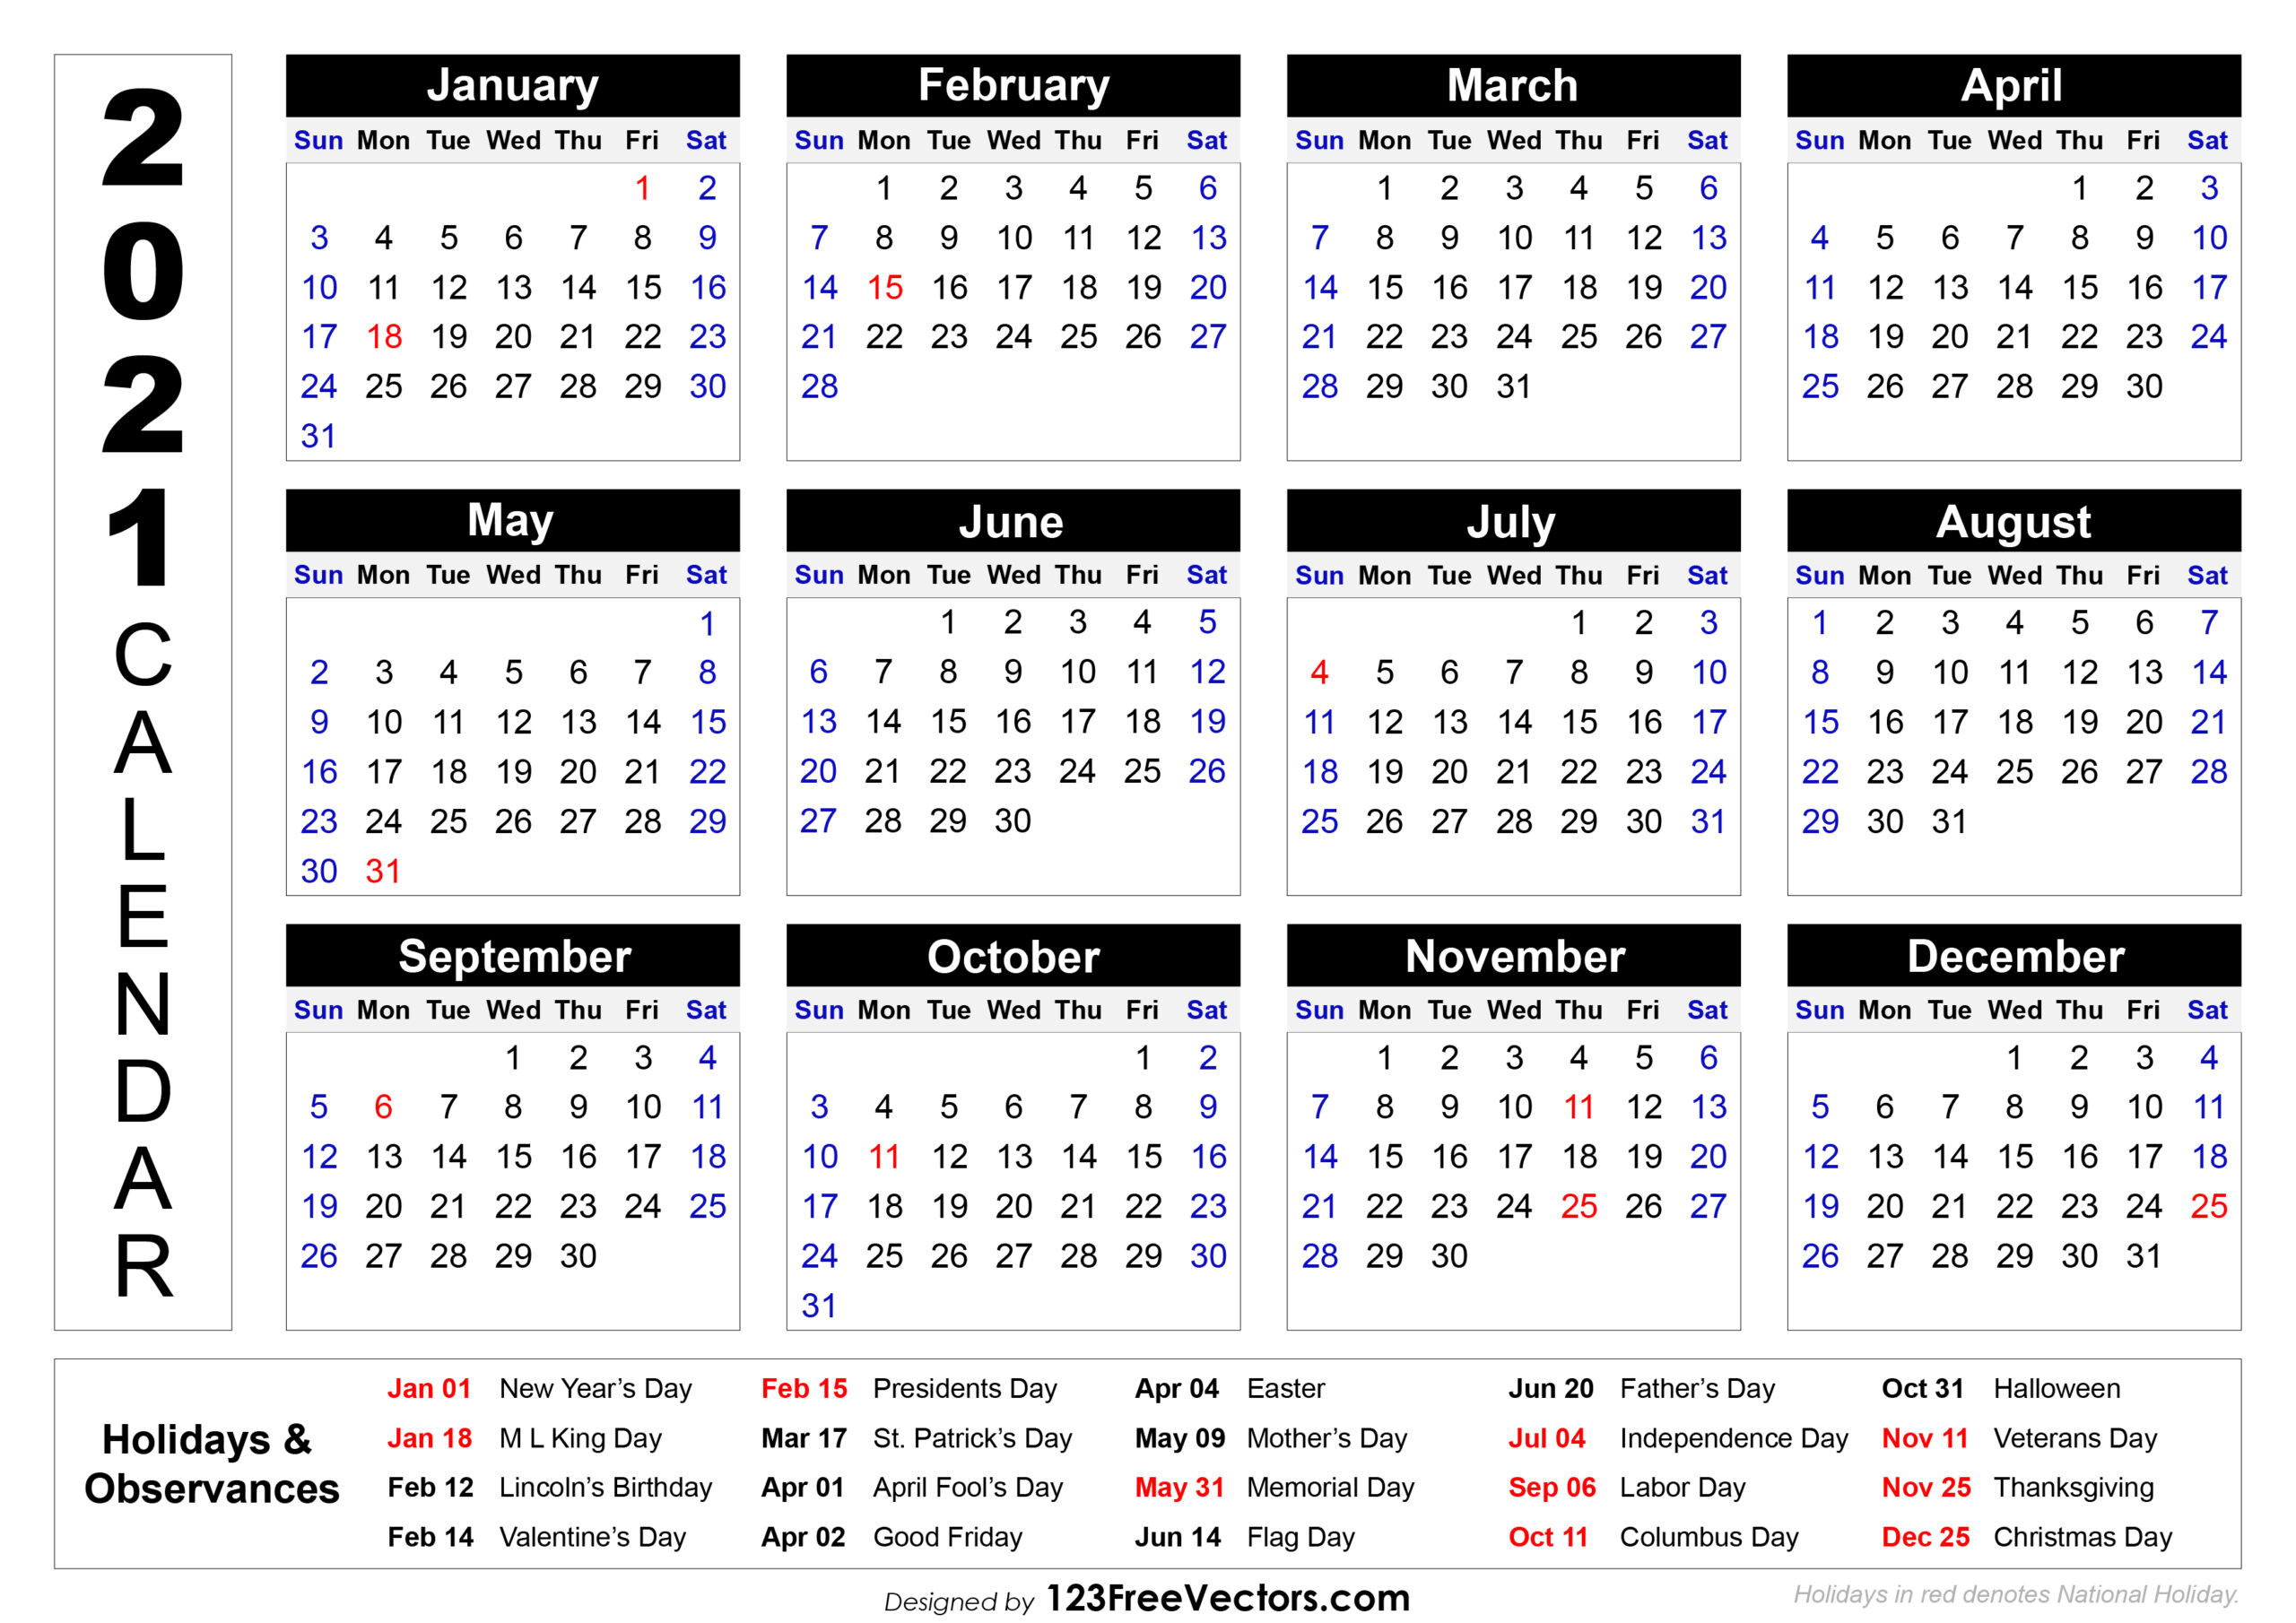 2021 Calendar Holidays And Observances | Printable-2021 Vacation Schedules